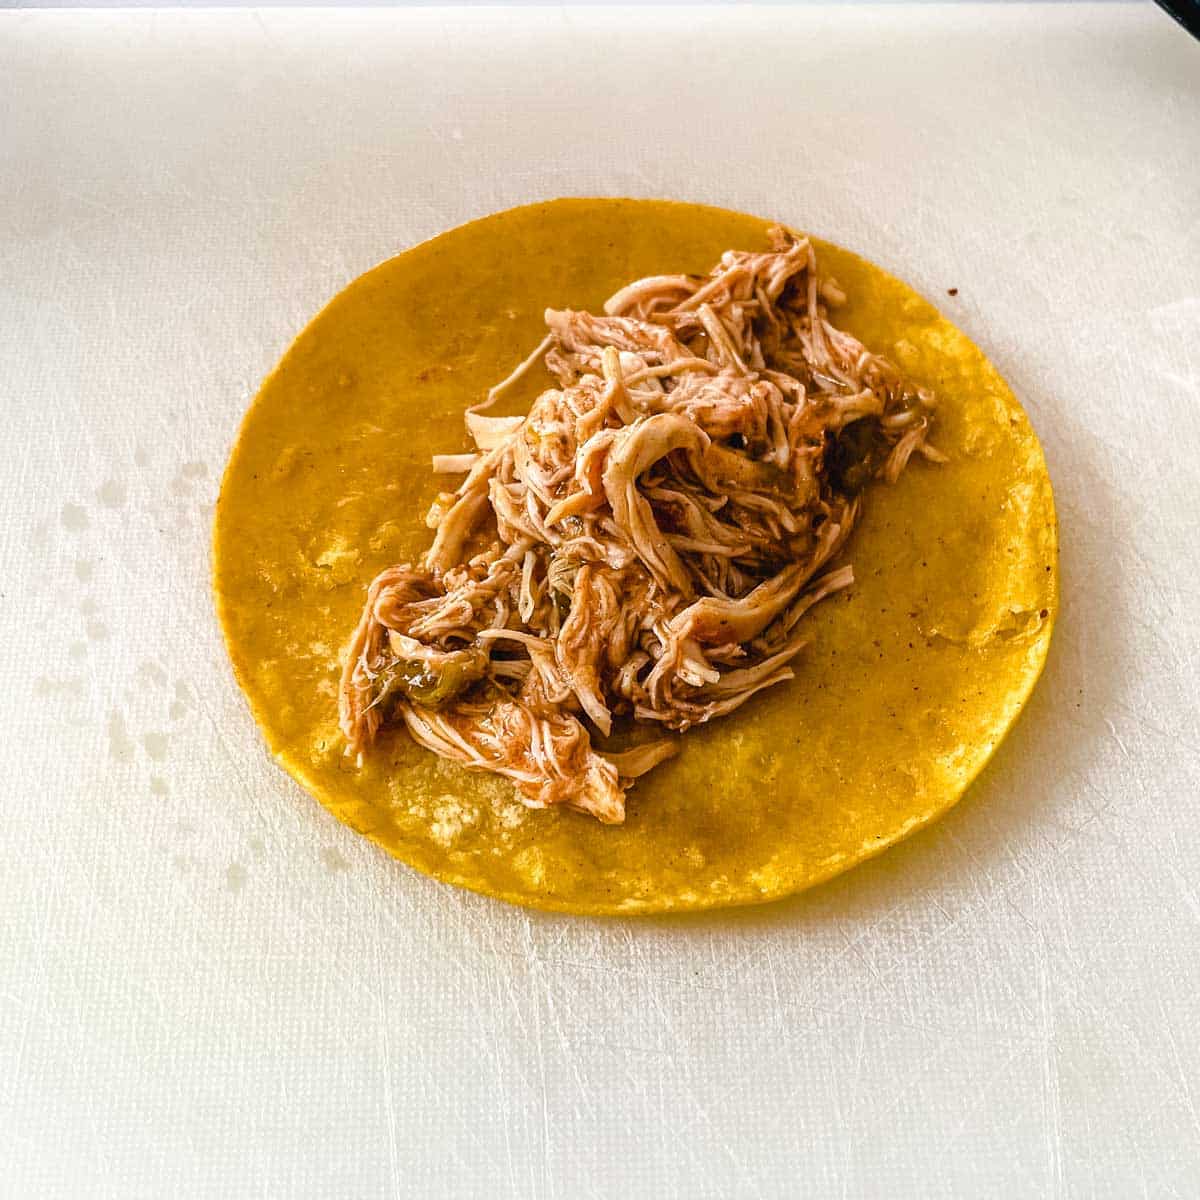 Chicken is added to the tortilla.